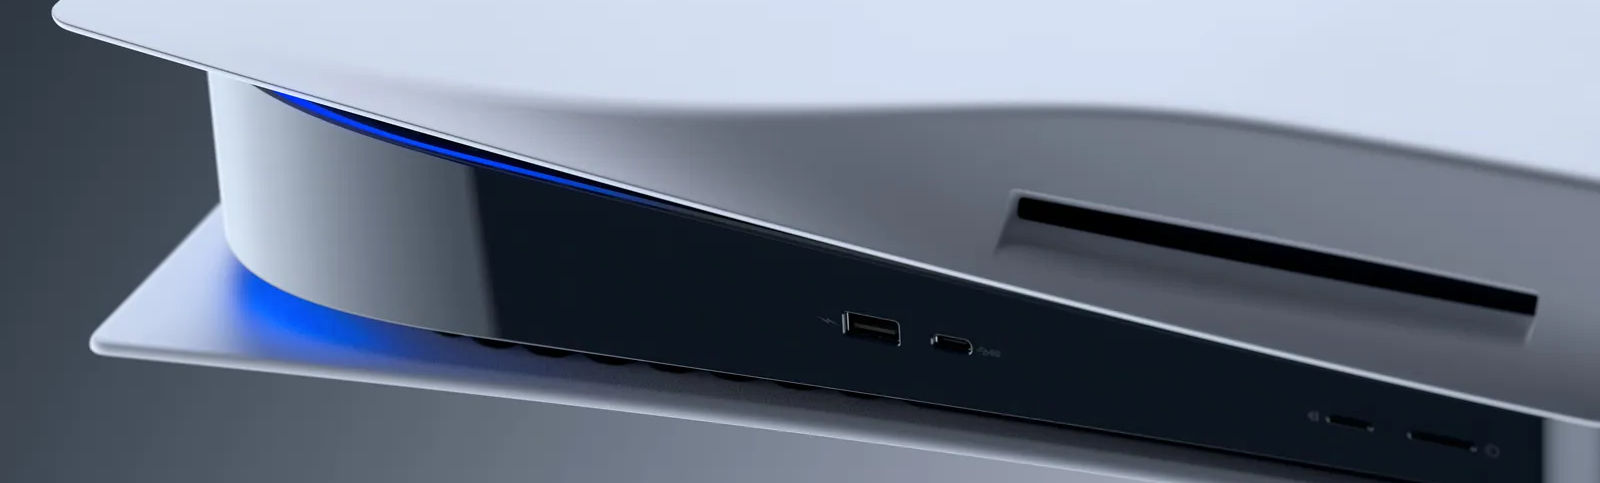 The PlayStation 5 Pro: A Leap Forward with AMD's Technology